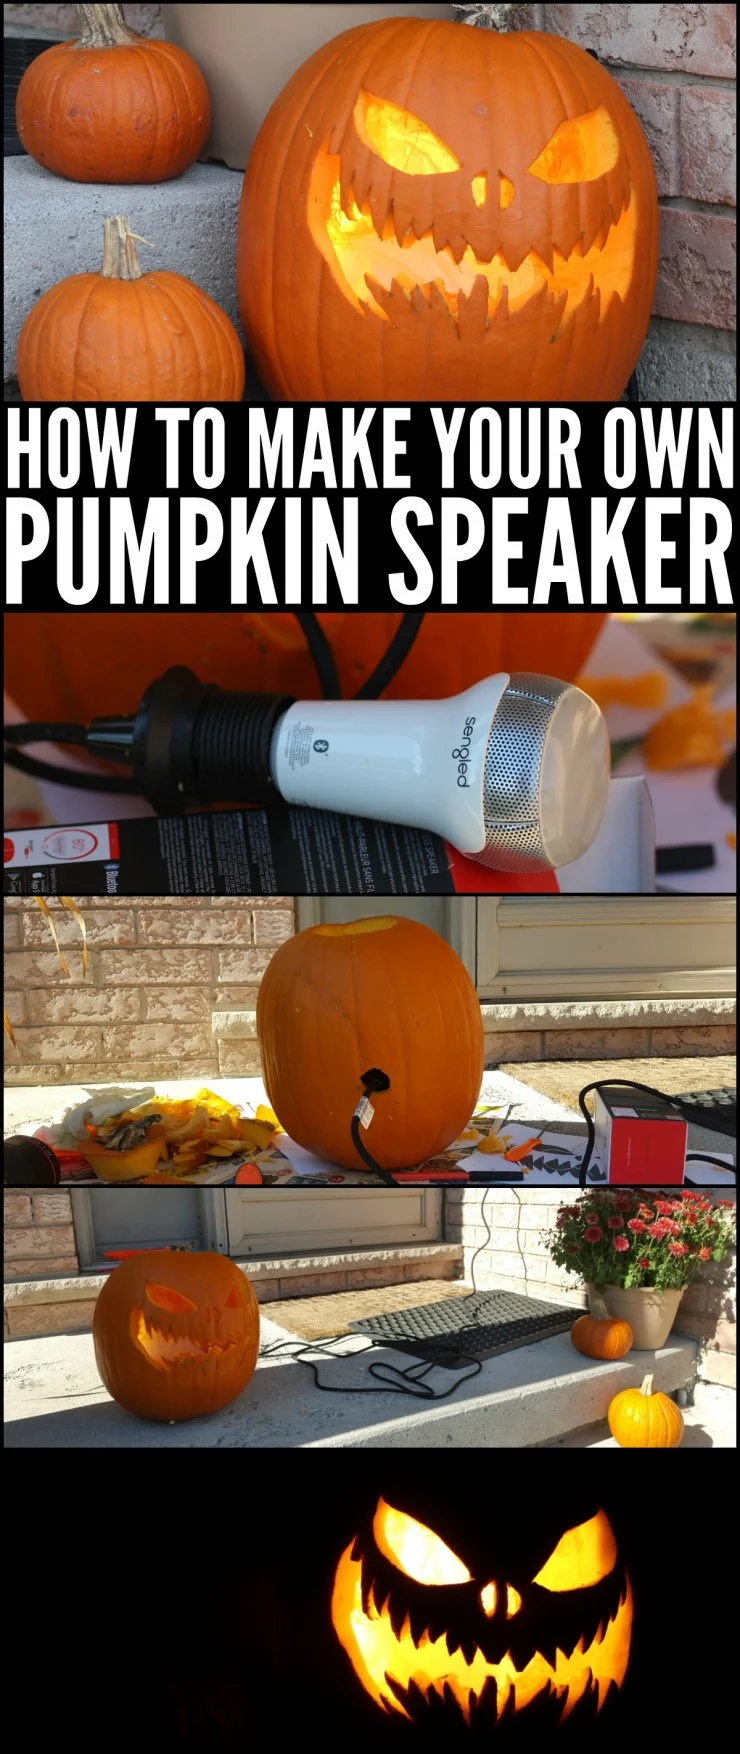 Turn a pumpkin into a spooky pumpkin speaker with this super easy to follow Halloween tutorial. You'll be scaring off ghosts and ghouls in no time with this Halloween decor idea!